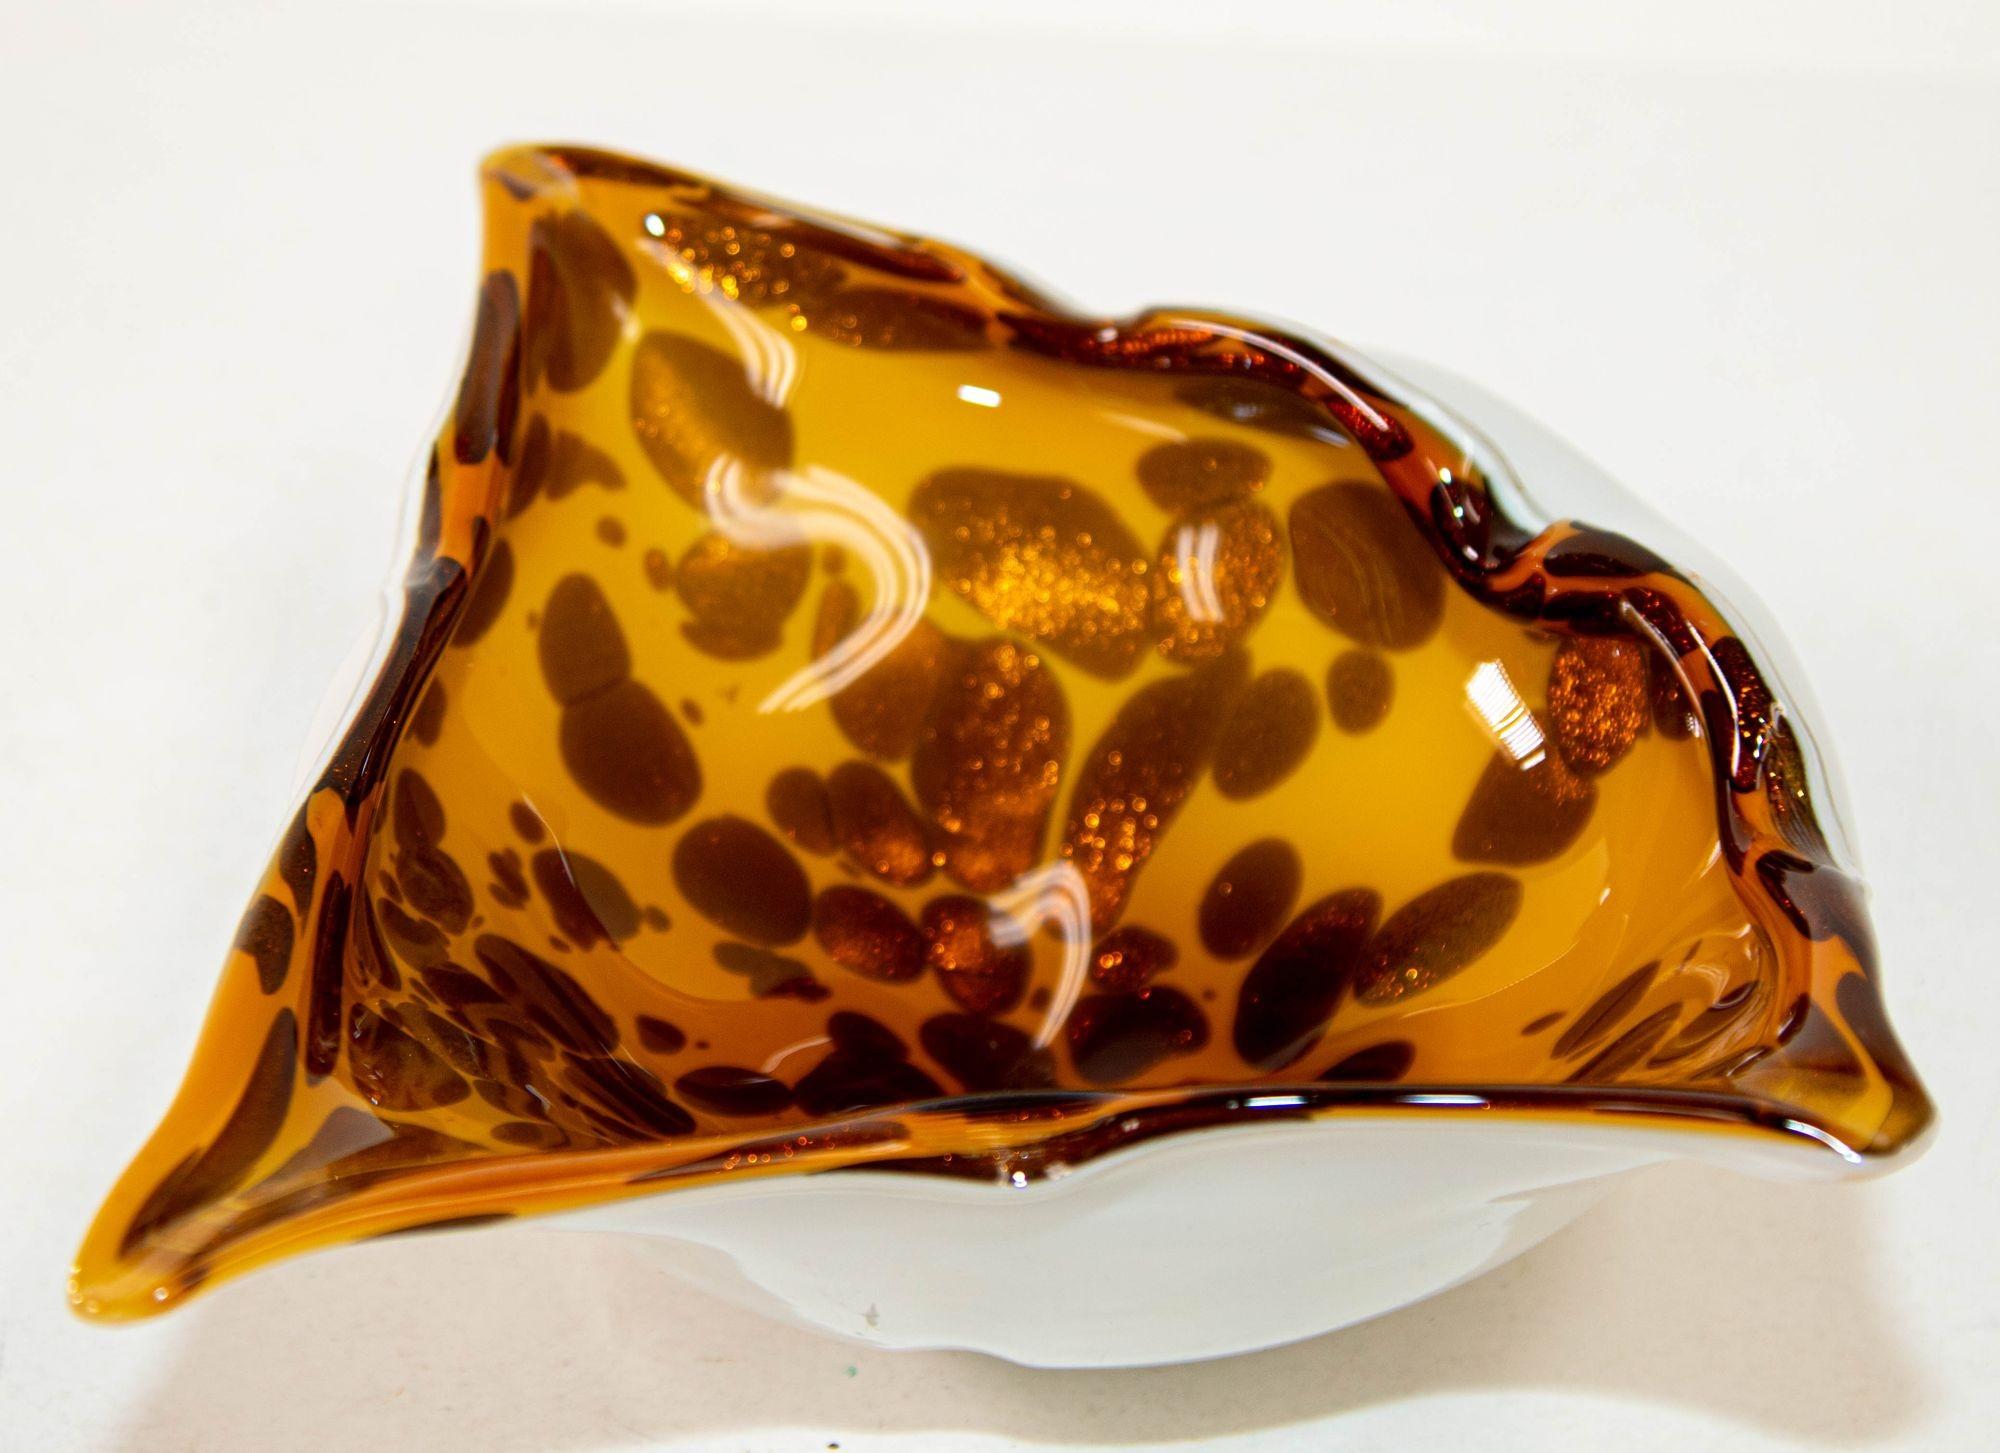 Murano Art Glass Manta Ray Tortoise Spotted Bowl Ashtray Vintage 1960s For Sale 3